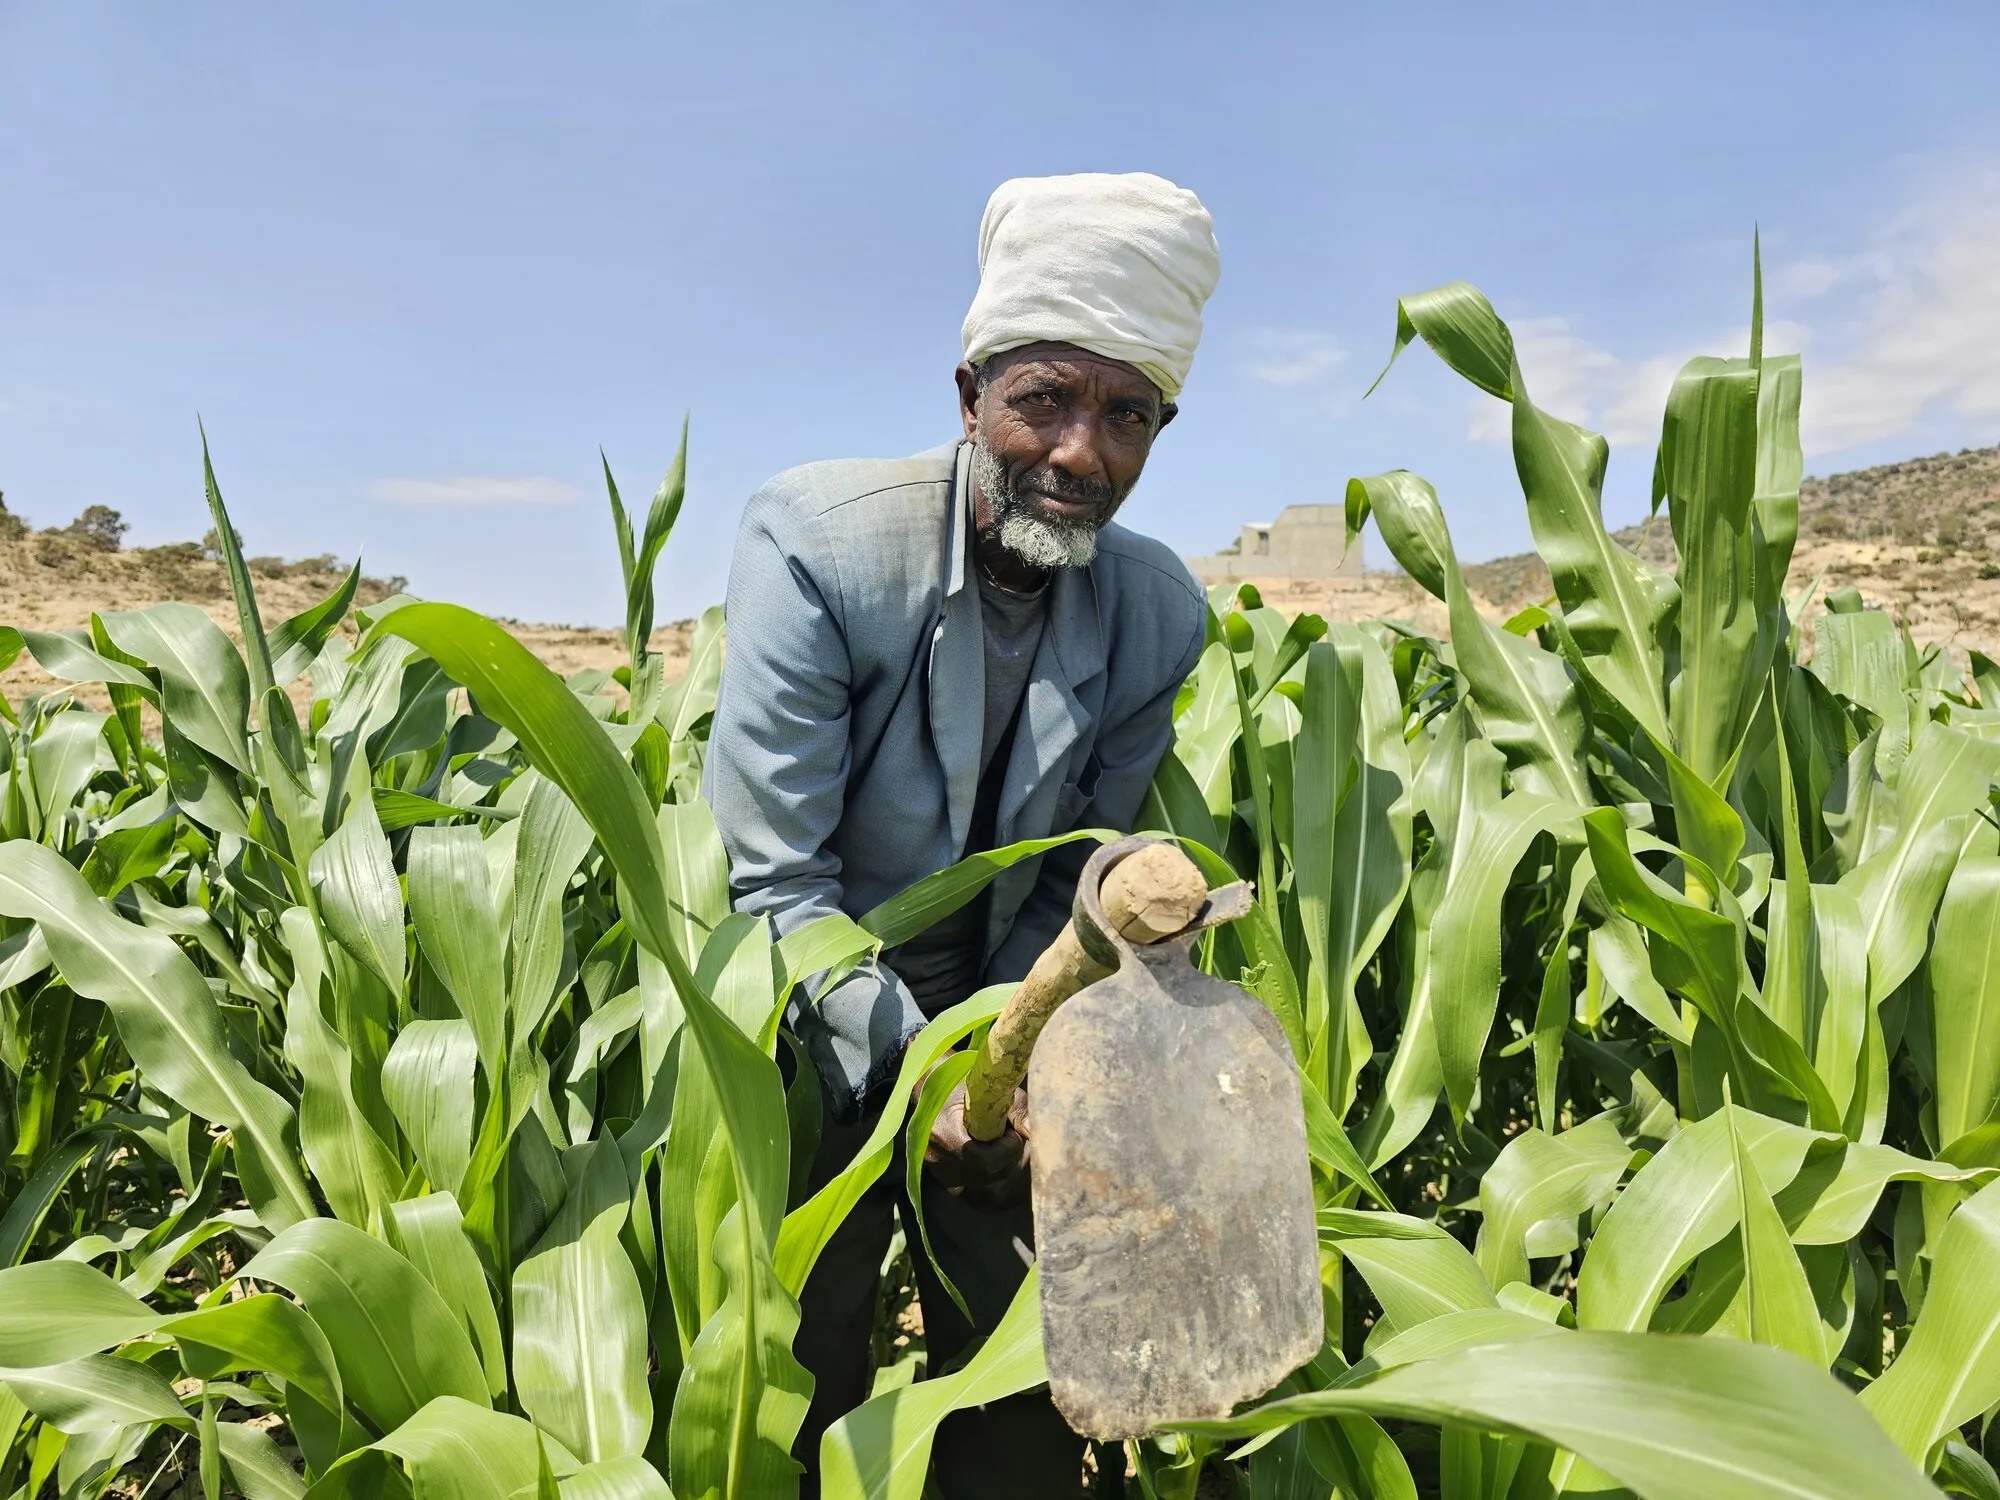 An Ethiopian farmer with turban working in his field with a spade.